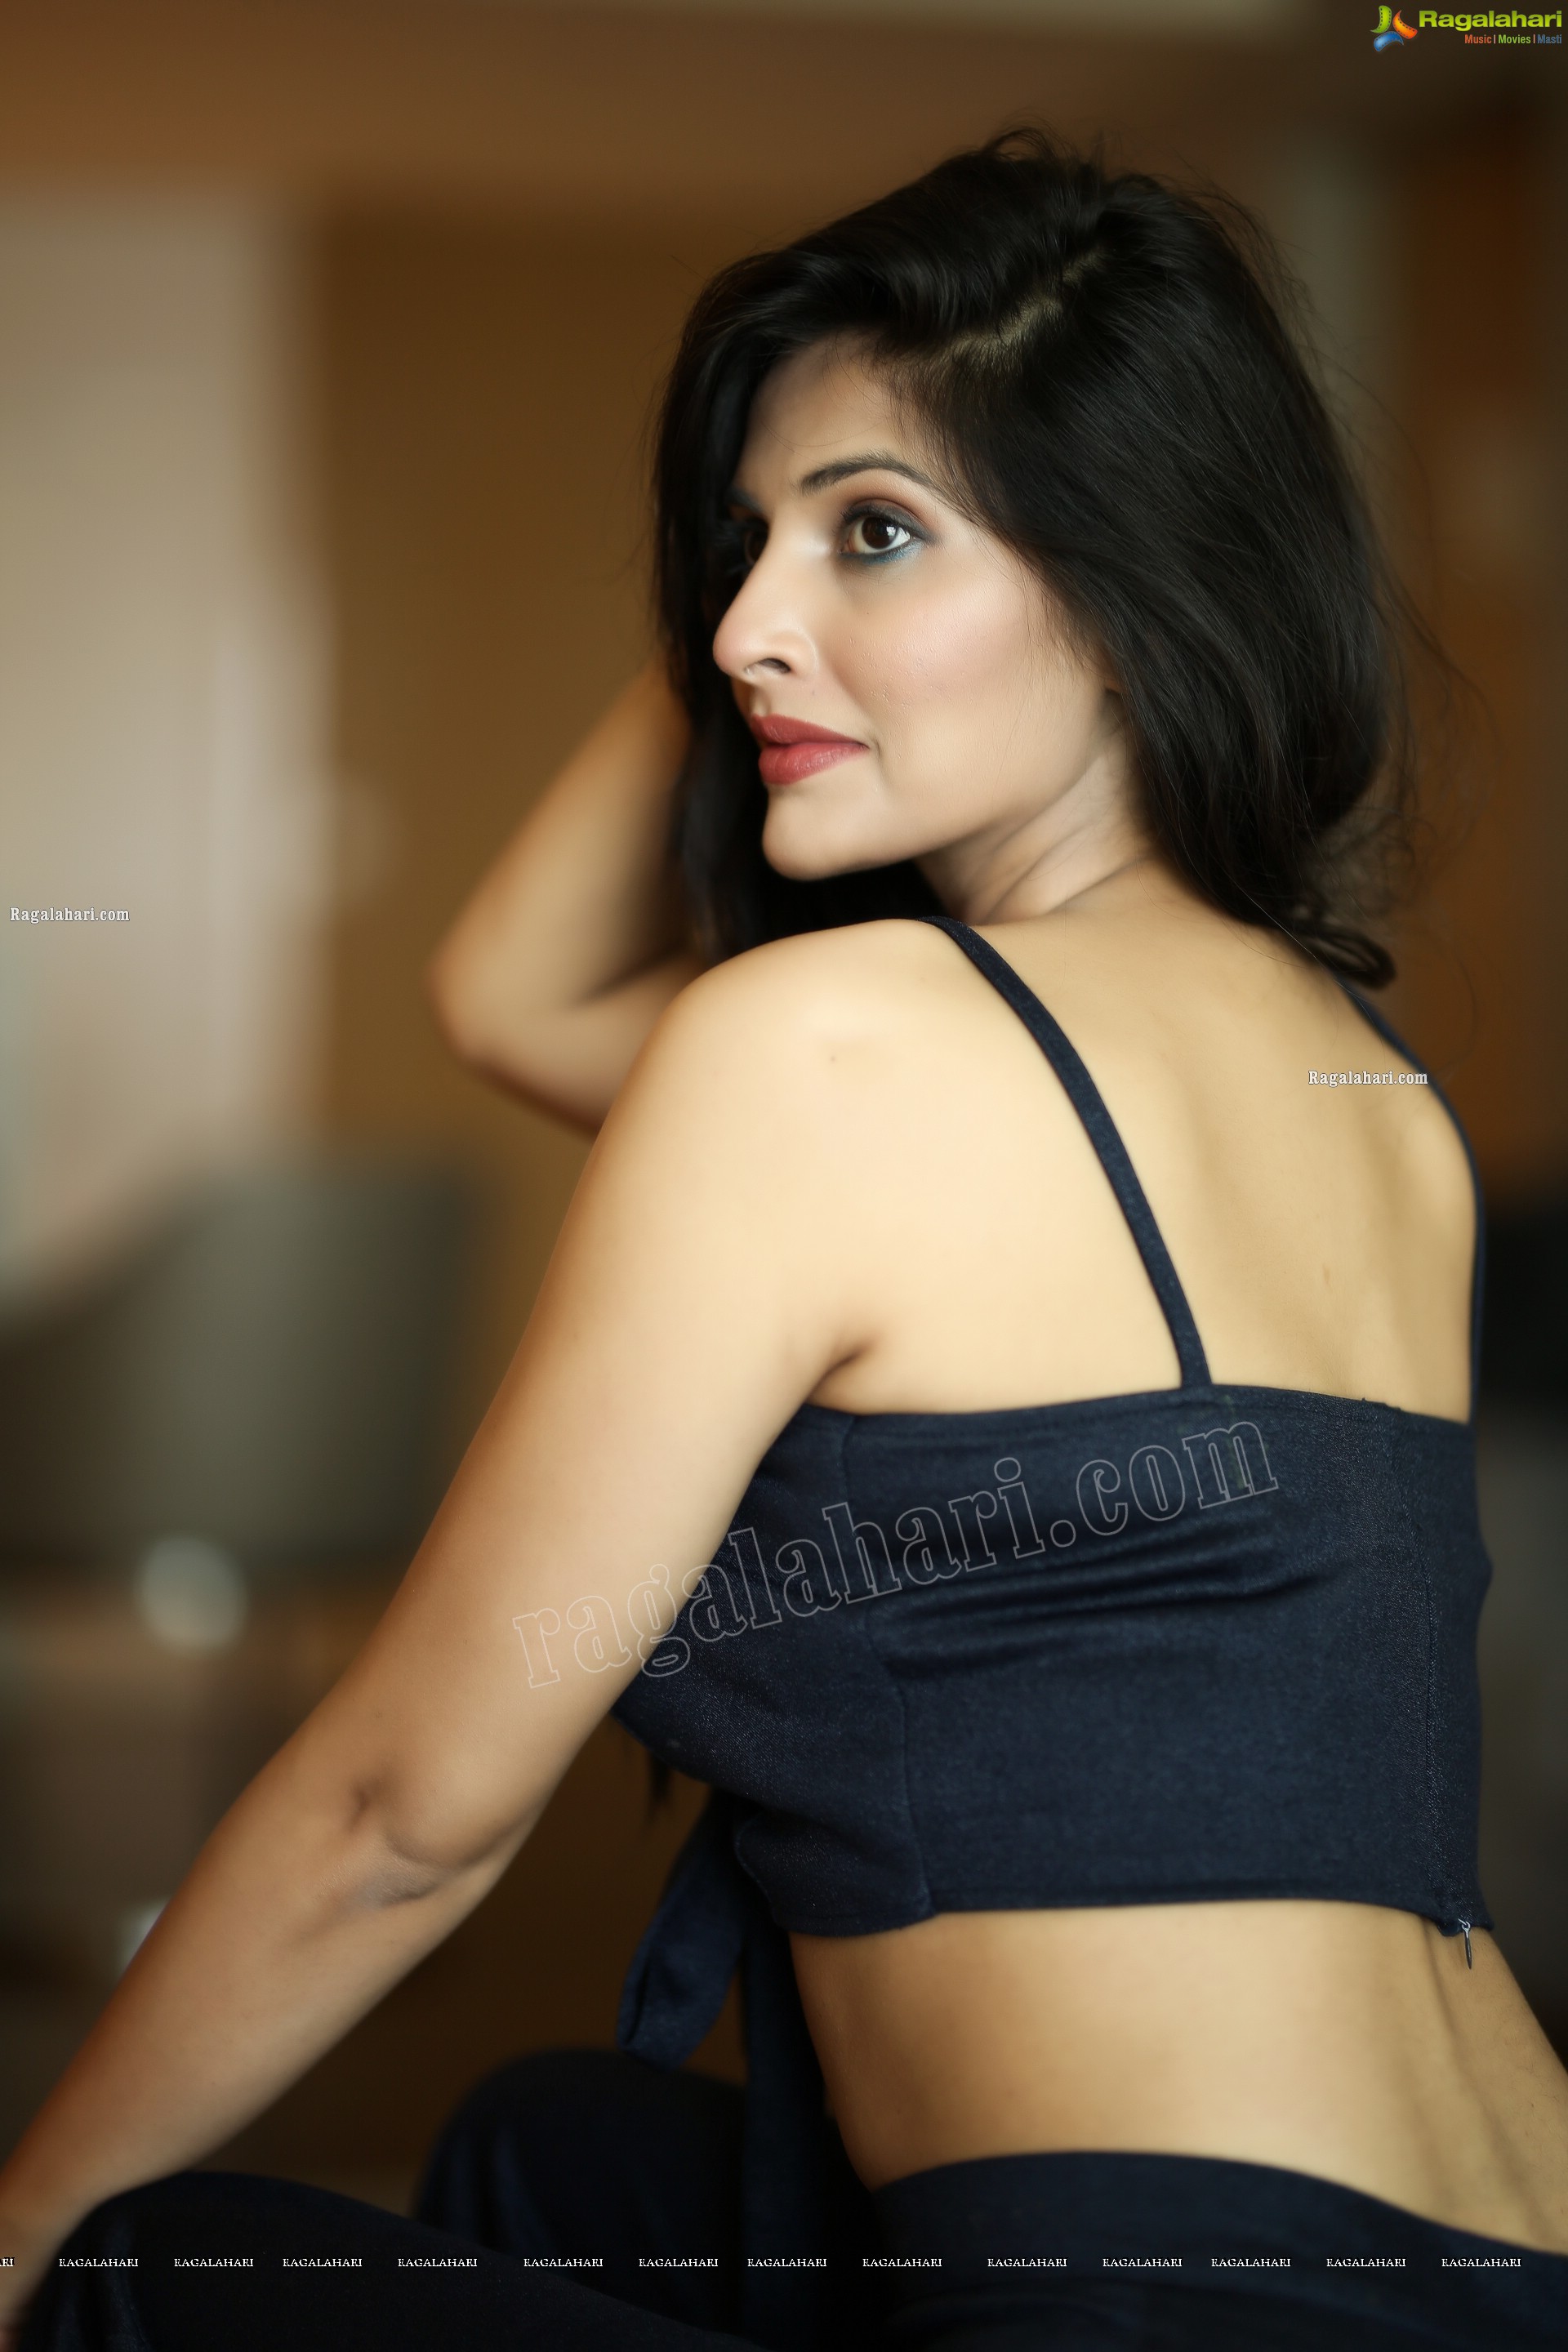 Khyati Sharma Tie Front Spaghetti Strap Crop Top and Pants, Exclusive Photo Shoot